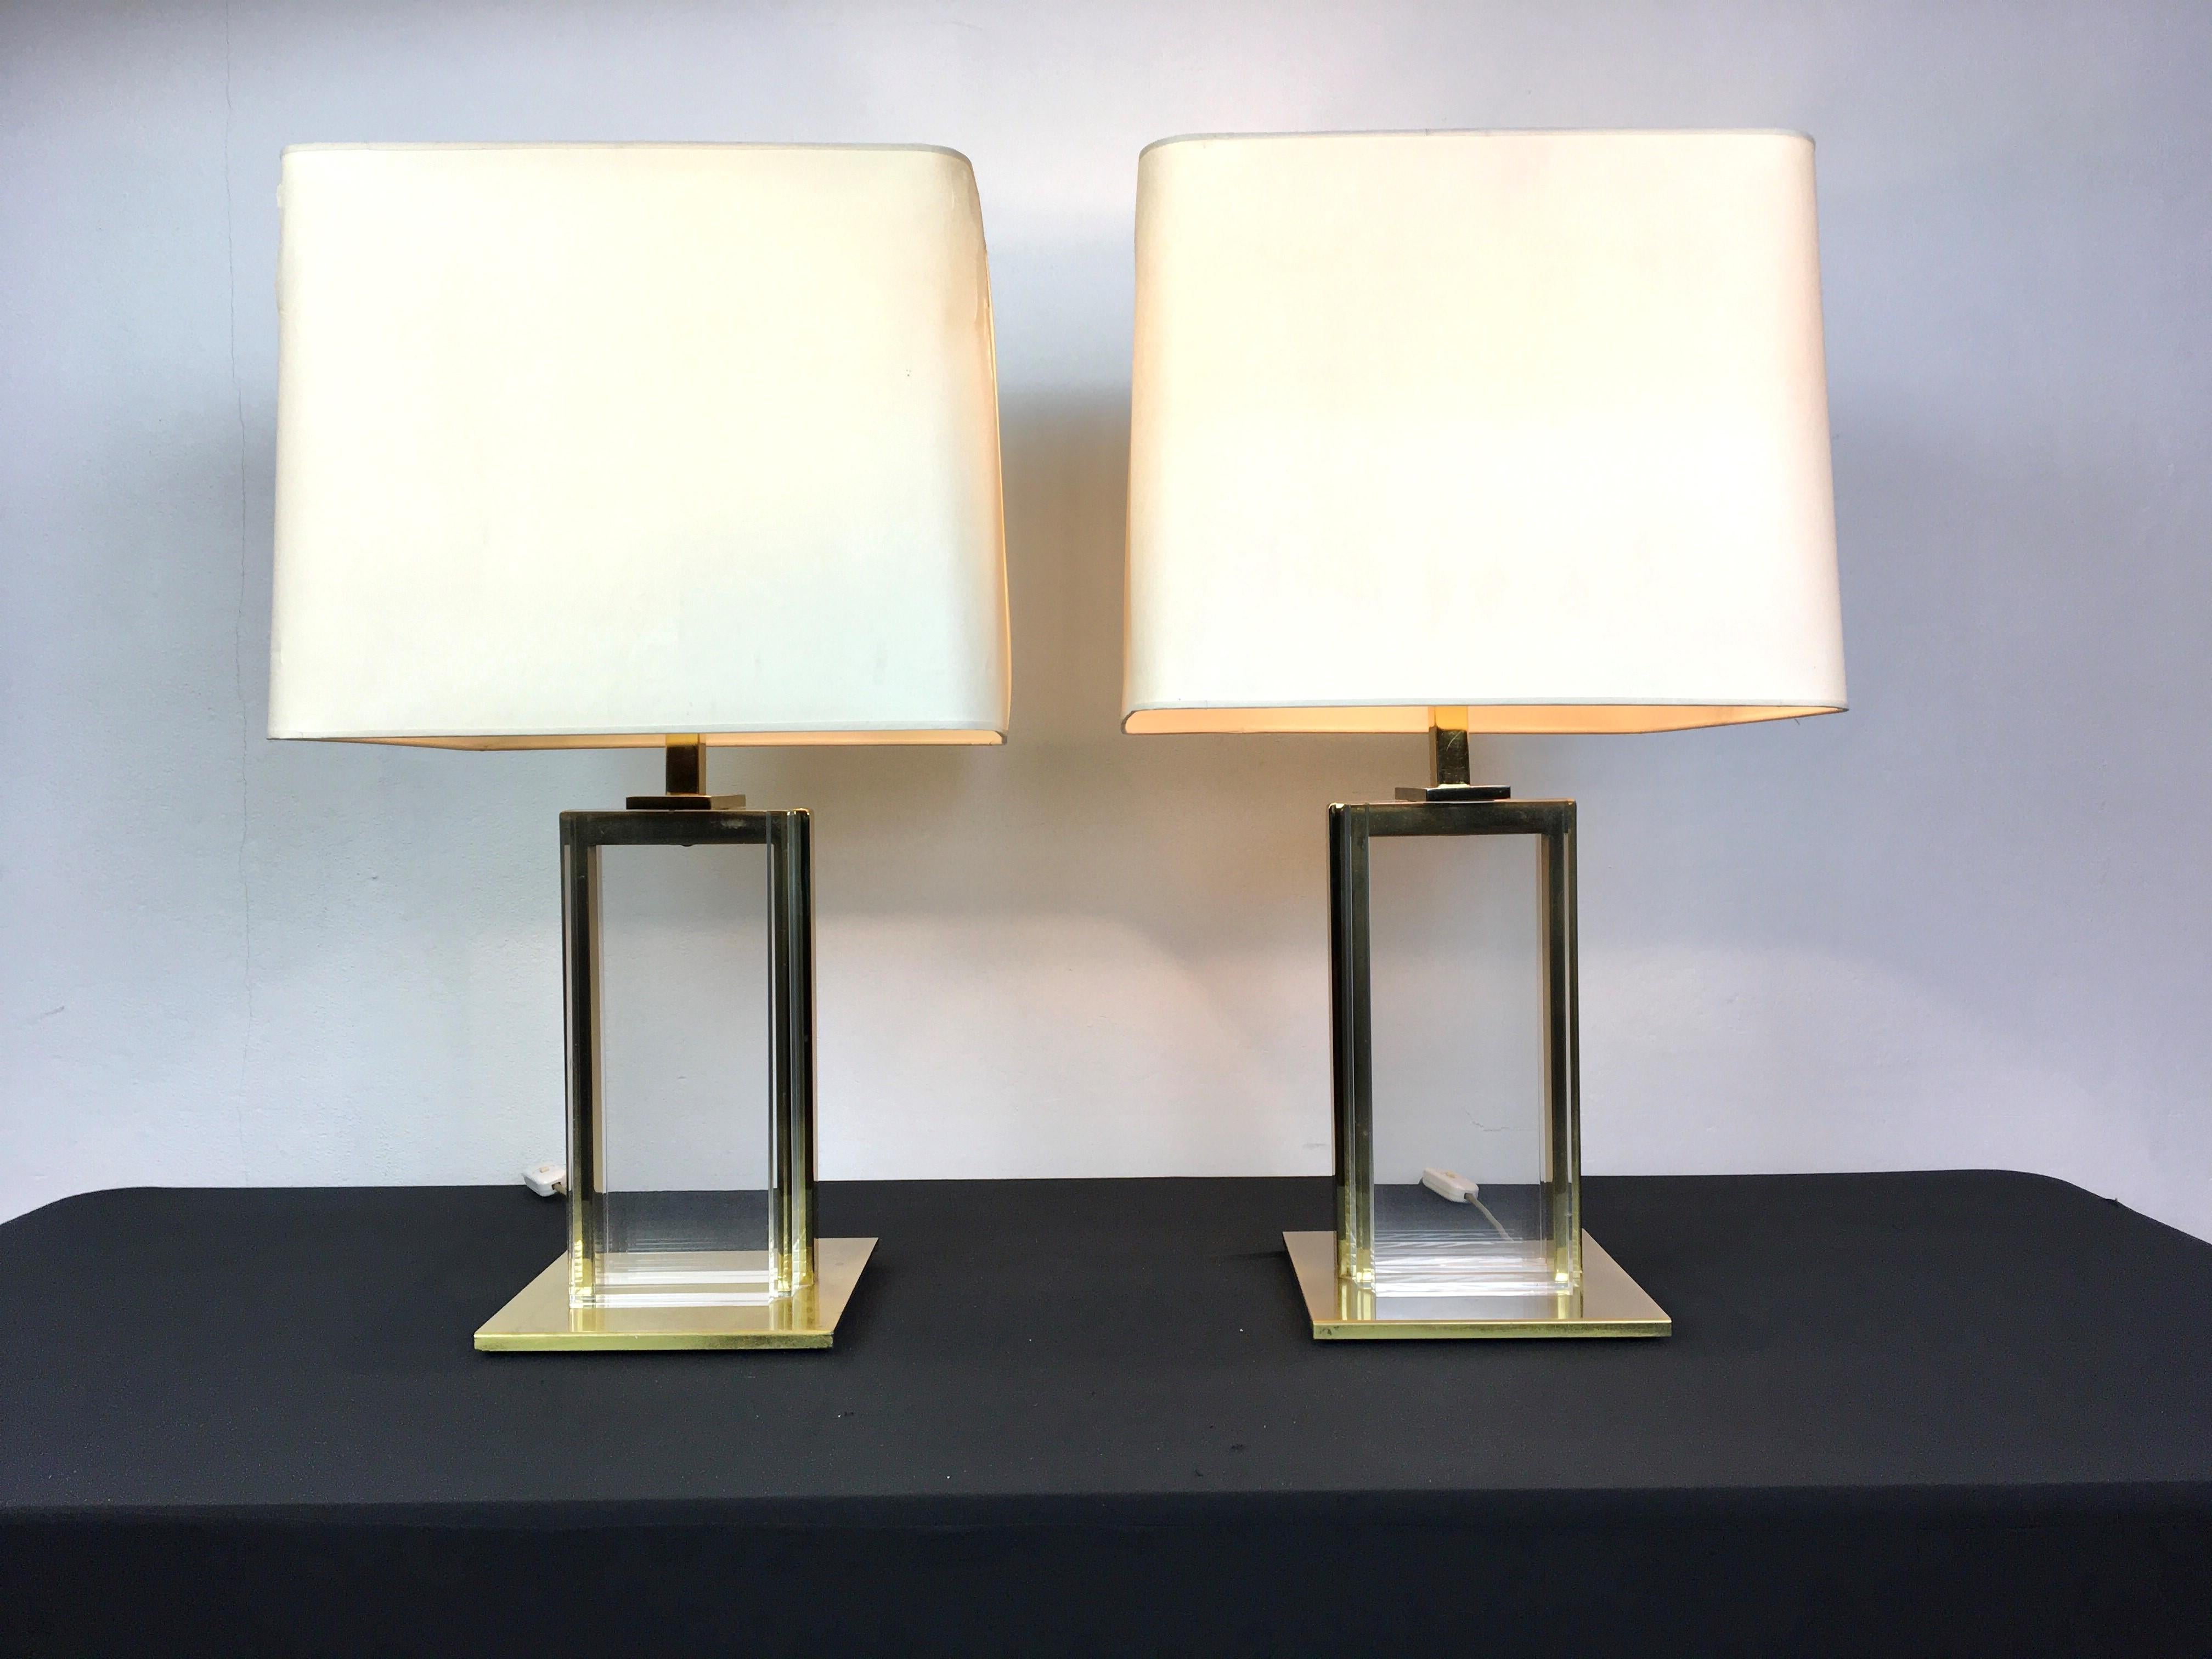 Pair of Belgo Chrome Table Lamps, Lucite and Brass, 1970s For Sale 11